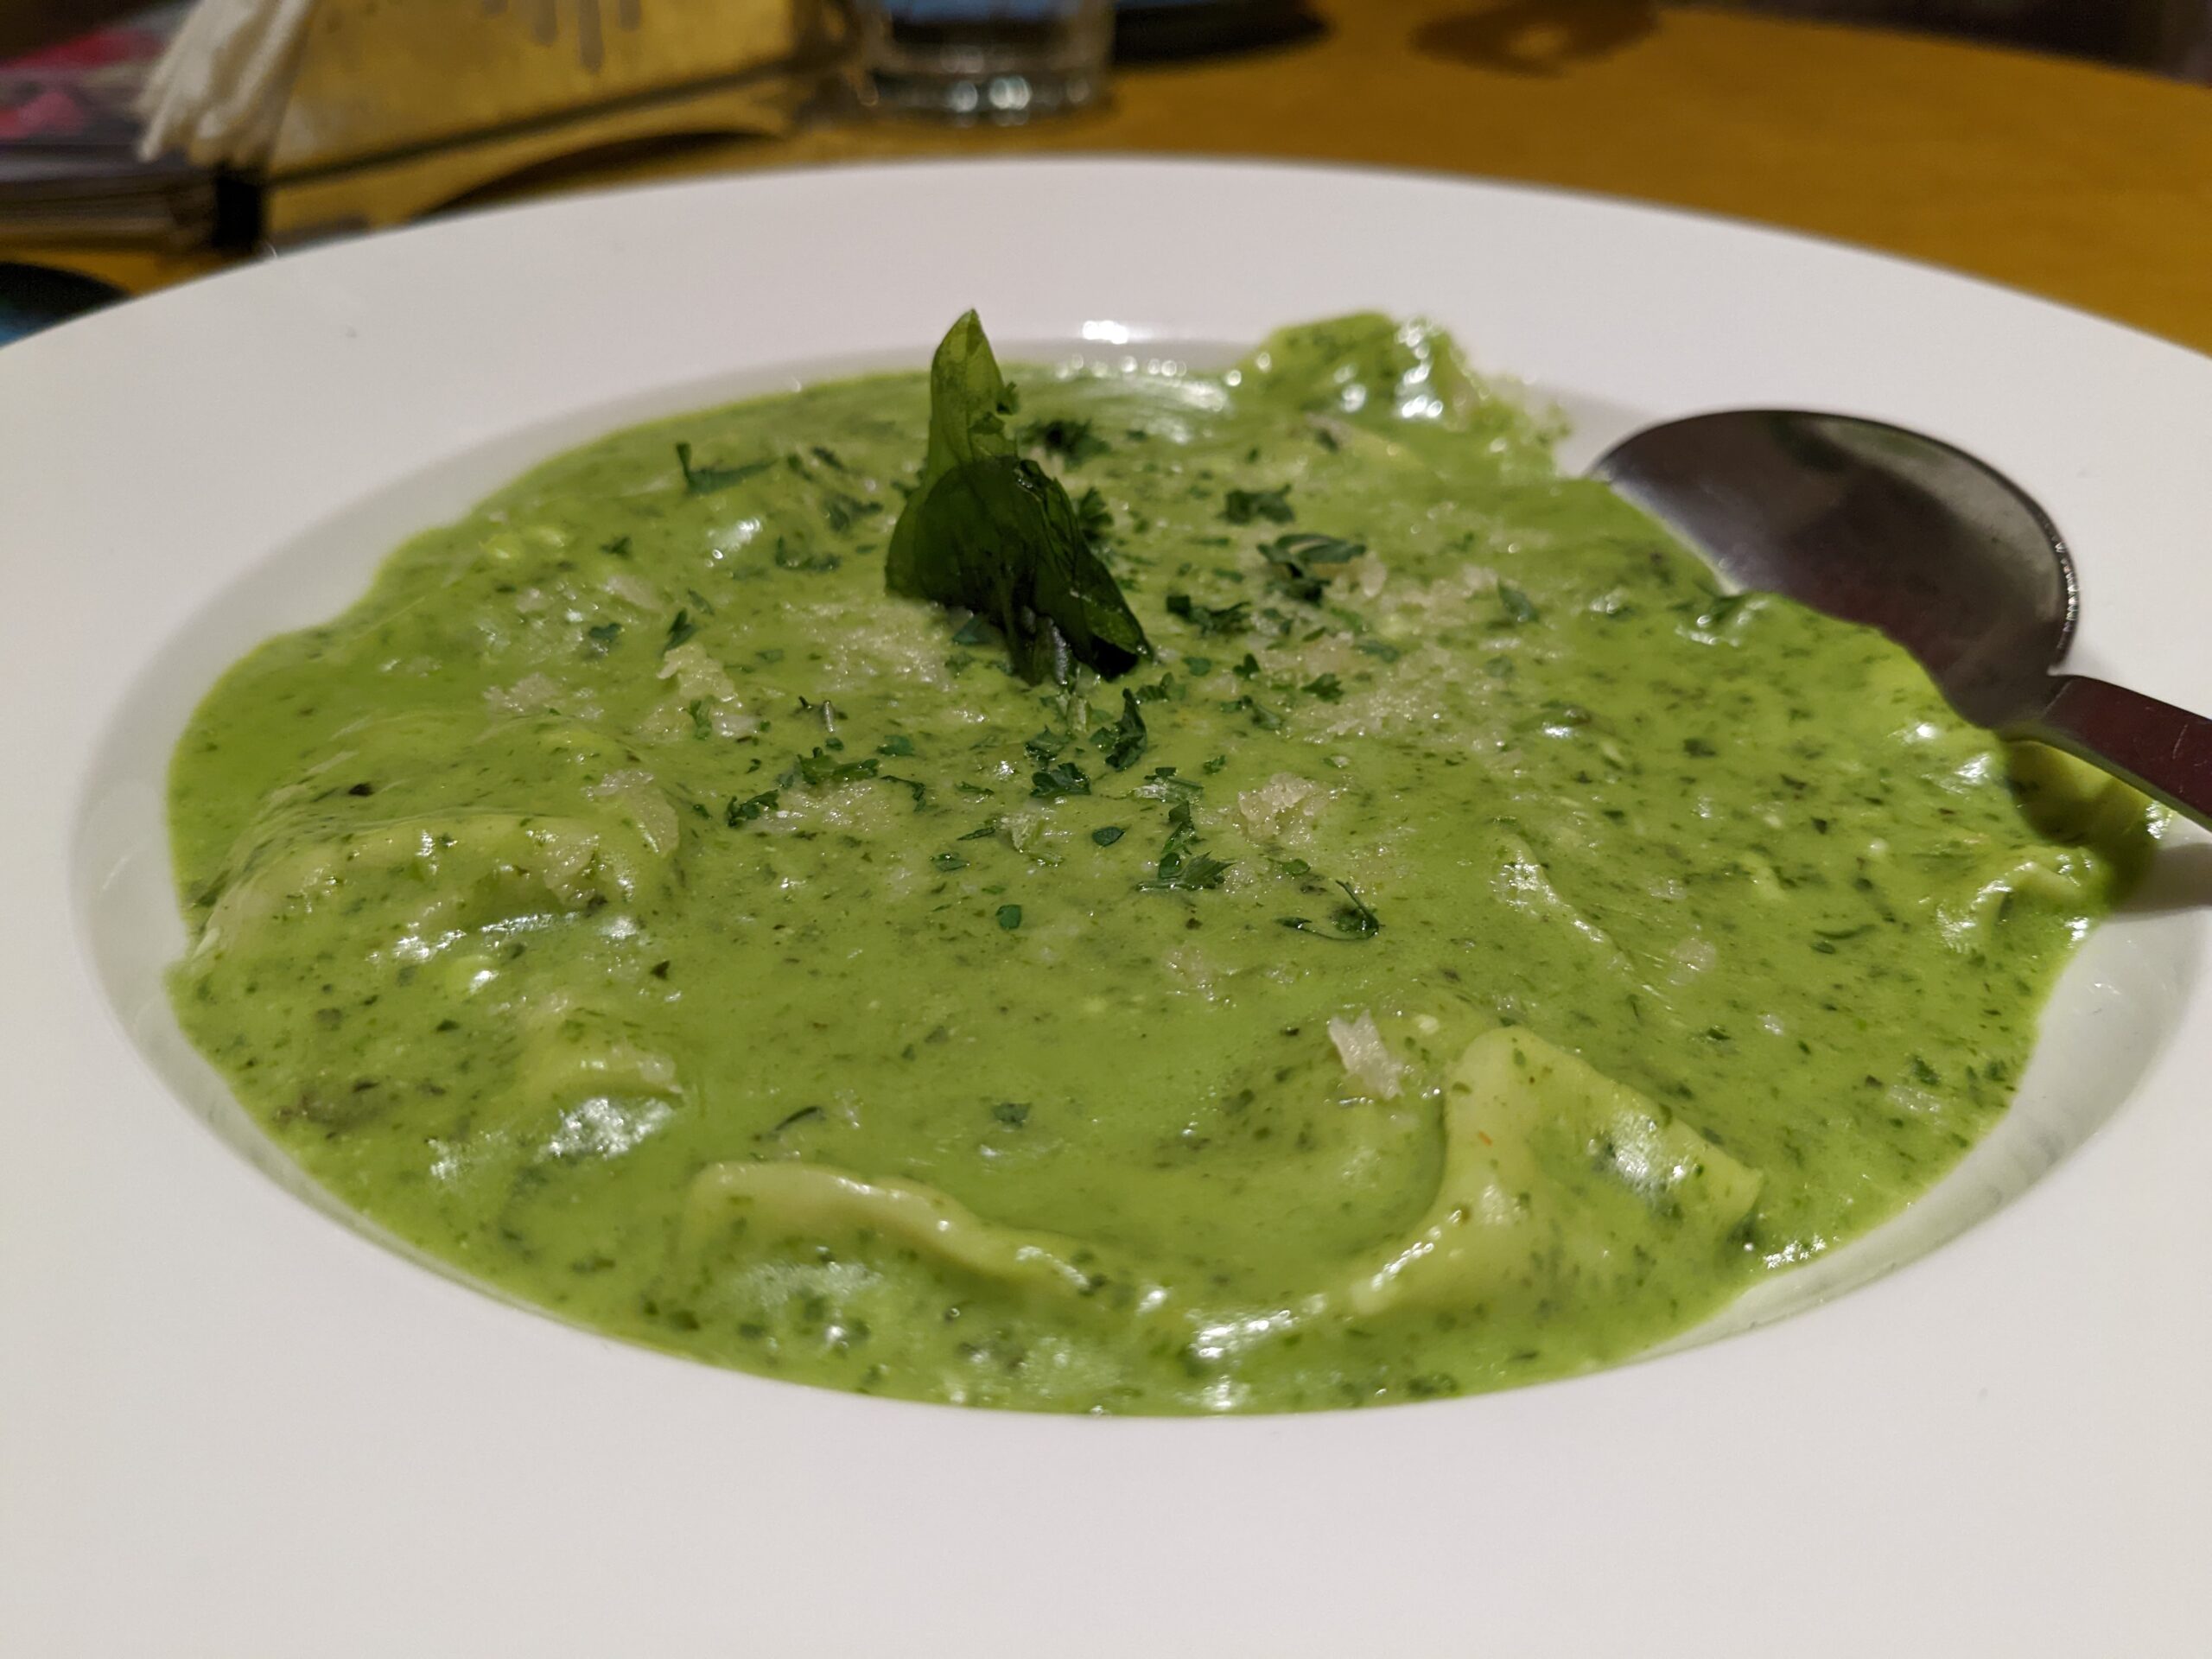 asparagus and mushroom ravioli in pesto sauce from canto cafe bar